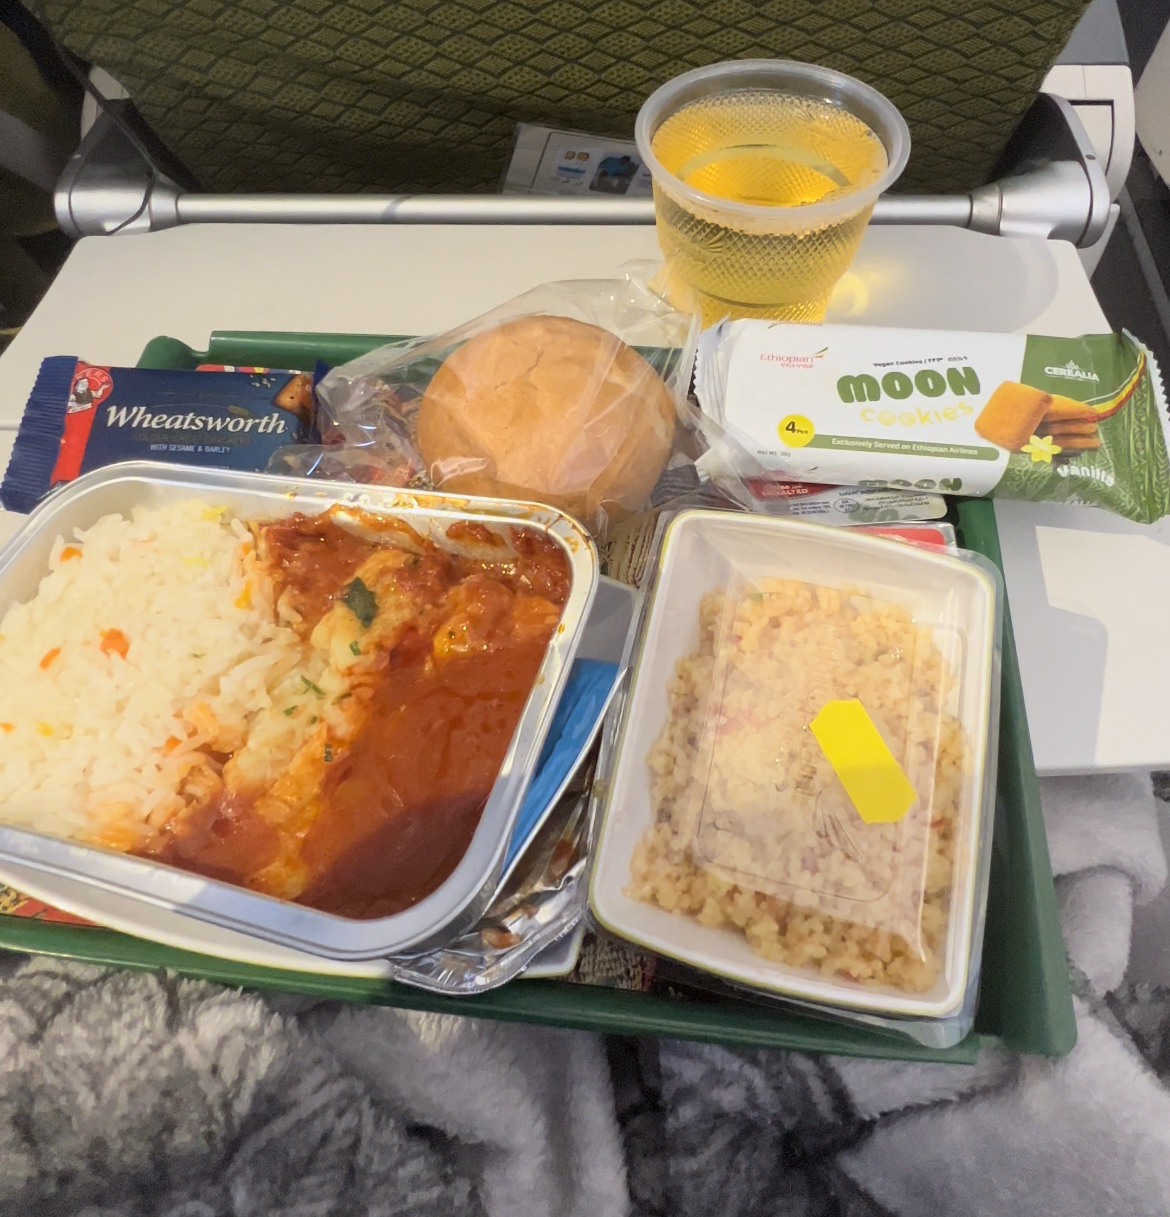 Ethiopian Airlines food served on the flight. 